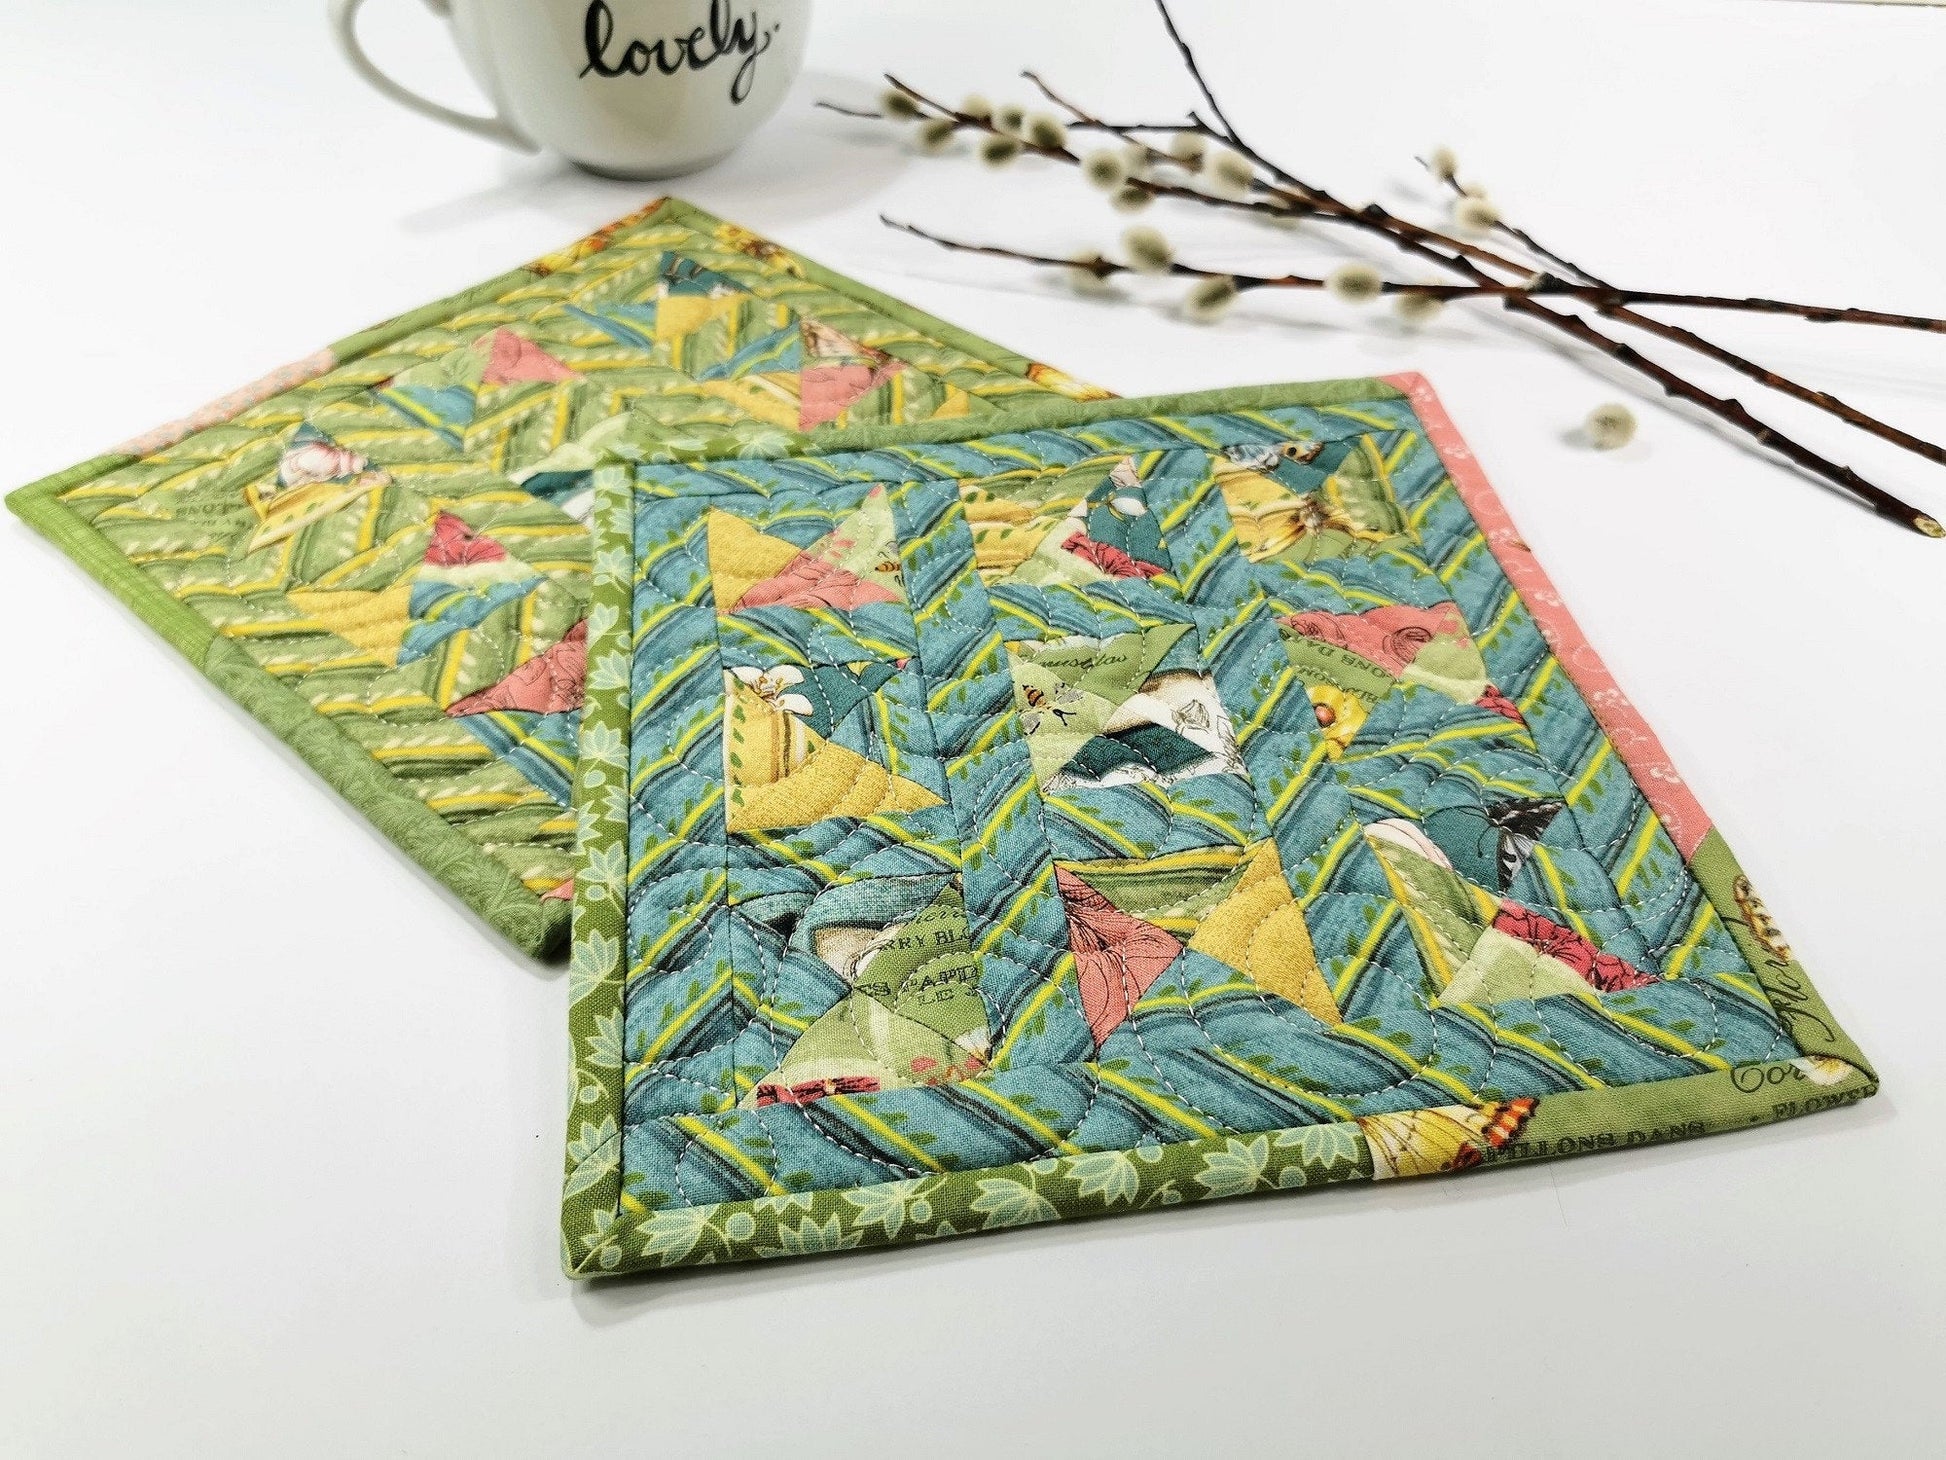 Two scrappy patchwork potholders shown on a white table with a mug and pussy willows in the background. Potholder colors are pastel shades of blue, green, pink, yellow .